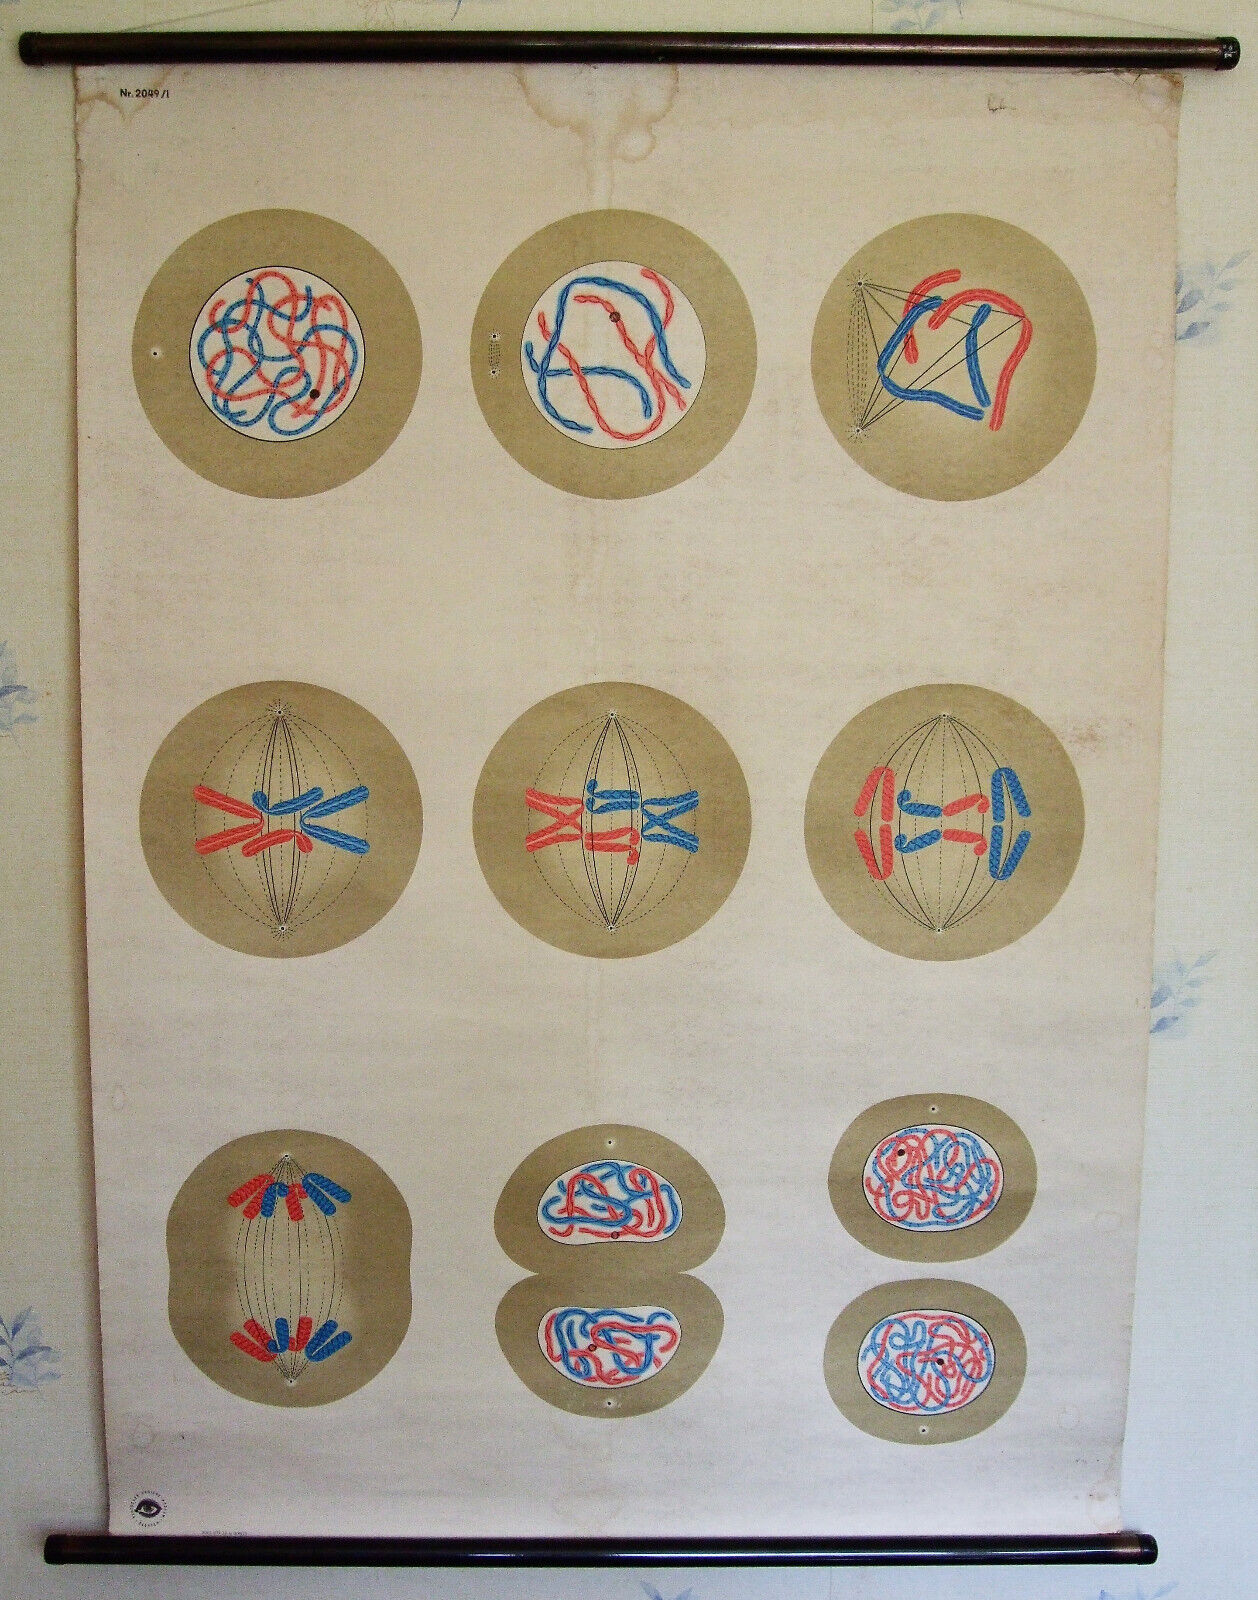 Vintage SCIENCE EDUCATION CHART - BIOLOGY: MITOSIS (CELL DIVISION) ; 1970s.